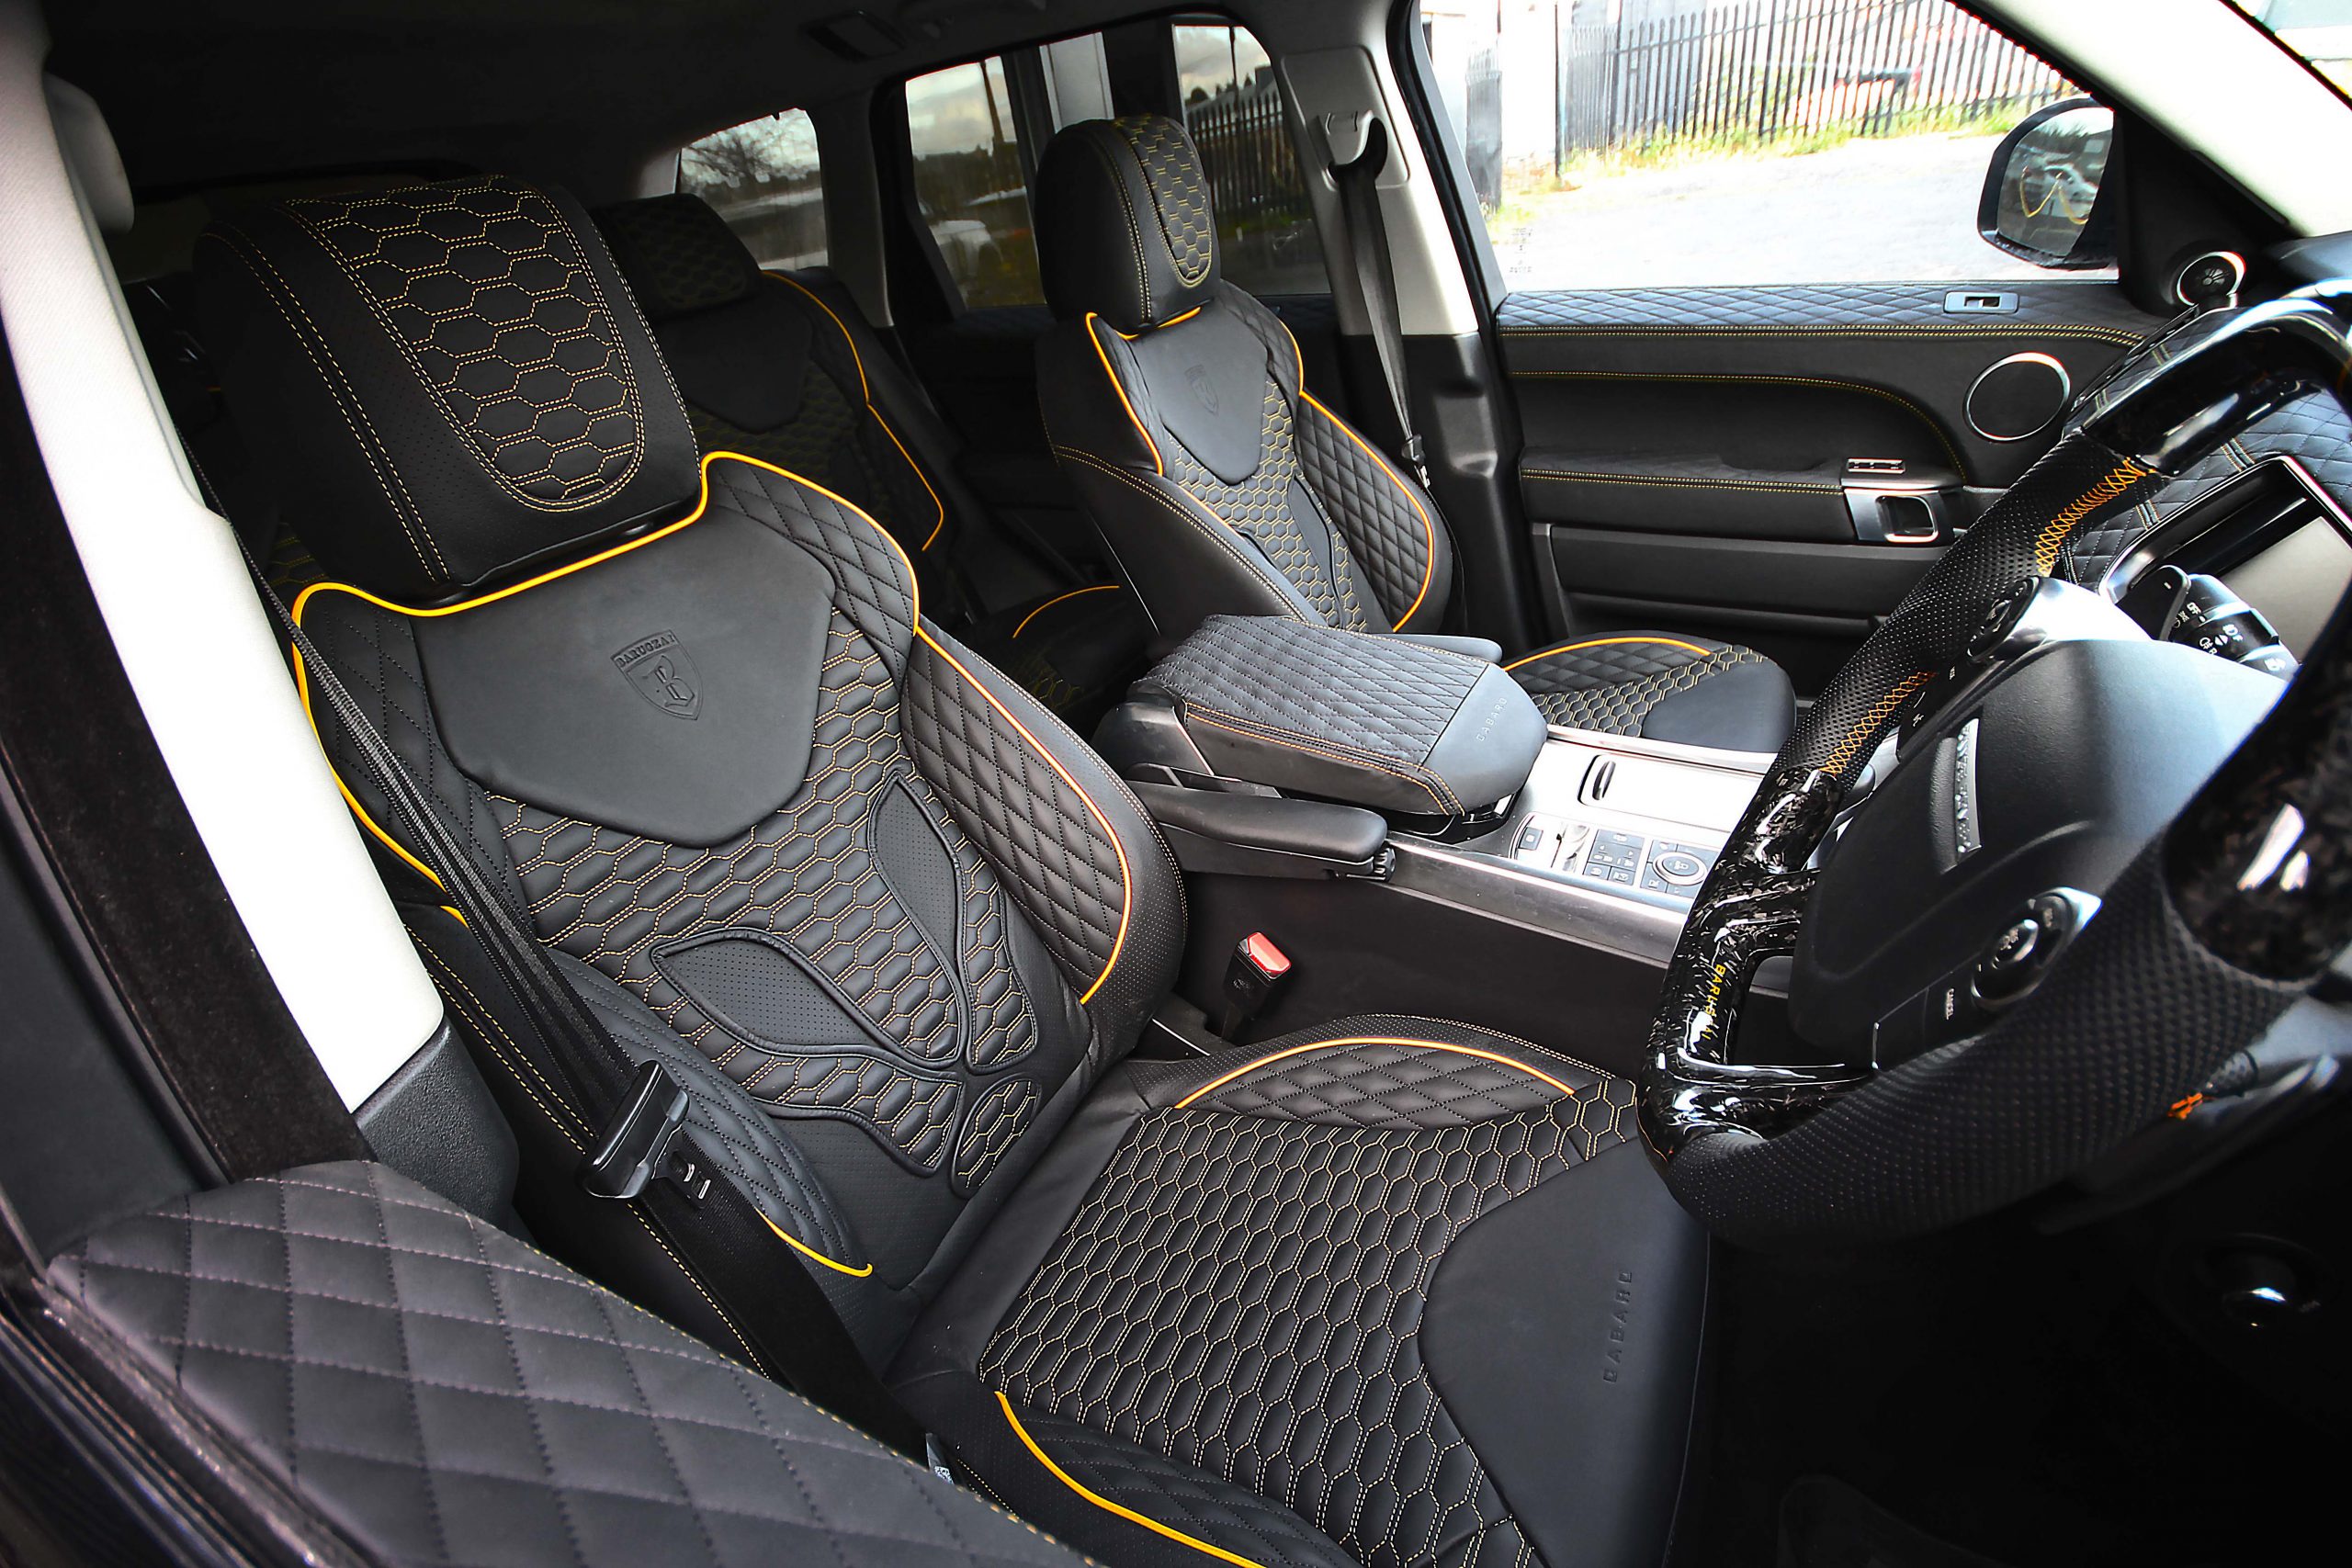 Wildcat xpressions interior for Land Rover Range Rover Vogue (2019+)